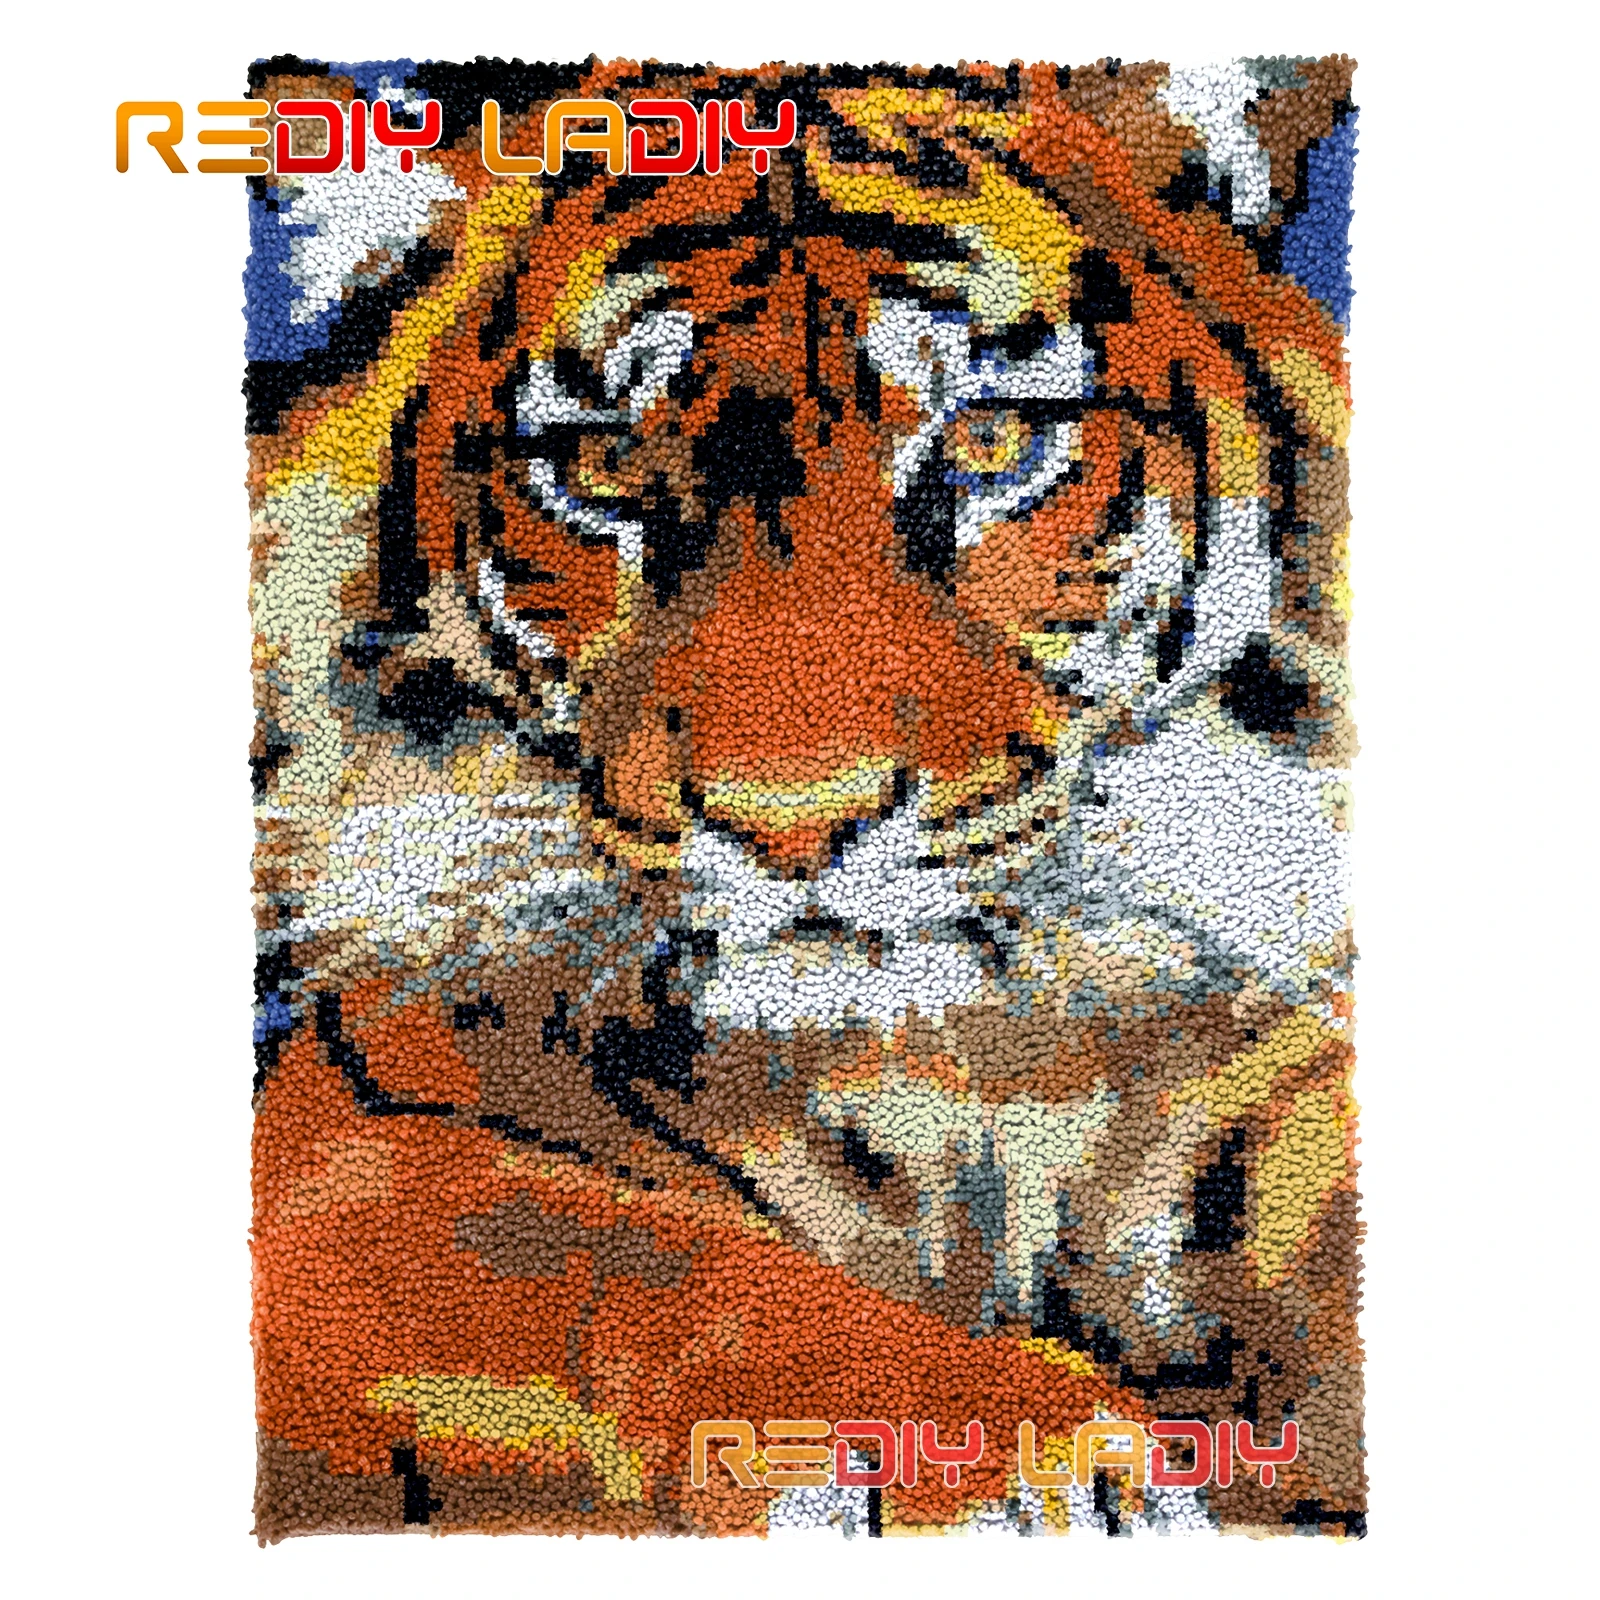 

DIY Carpet Rug Kits King of Tiger Seat Cushion Latch Hook Rug Thick Yarn Needlework Crocheting Tapestry Knotted Floor Mat Crafts